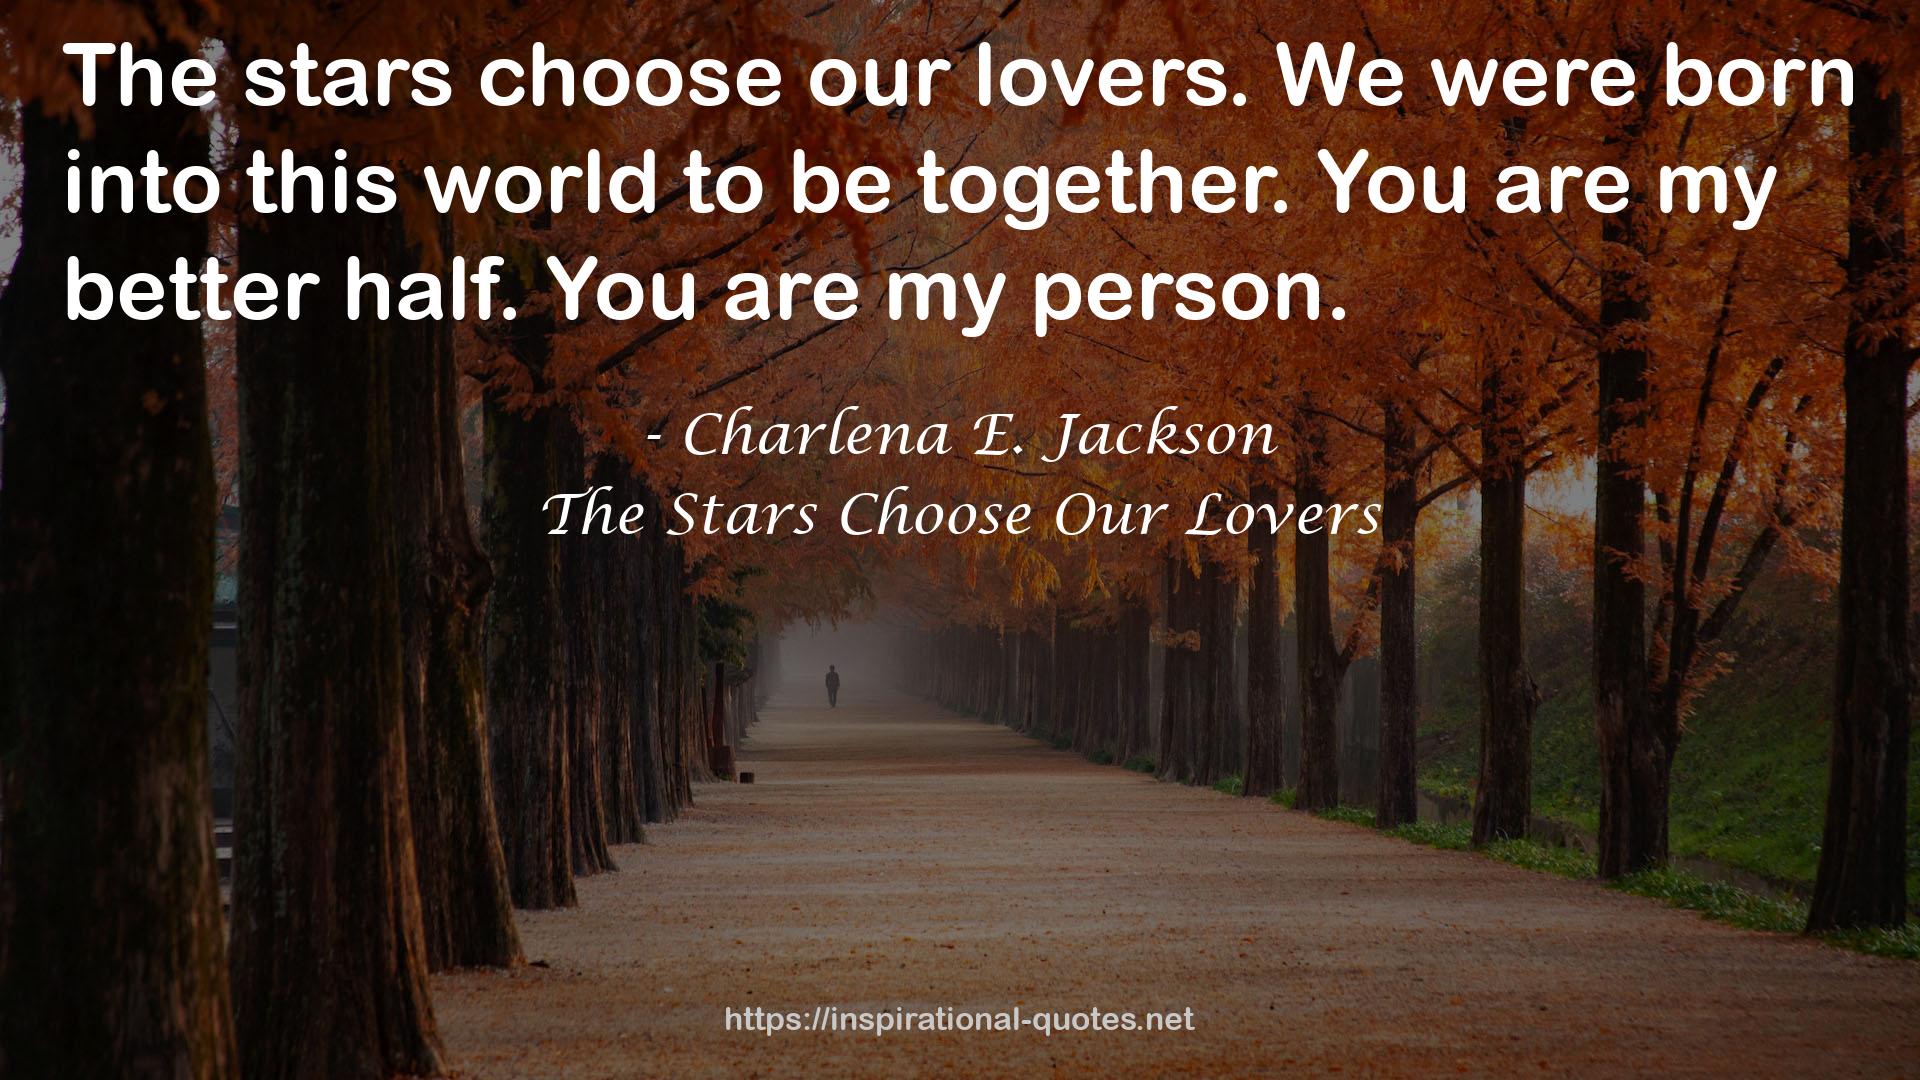 The Stars Choose Our Lovers QUOTES